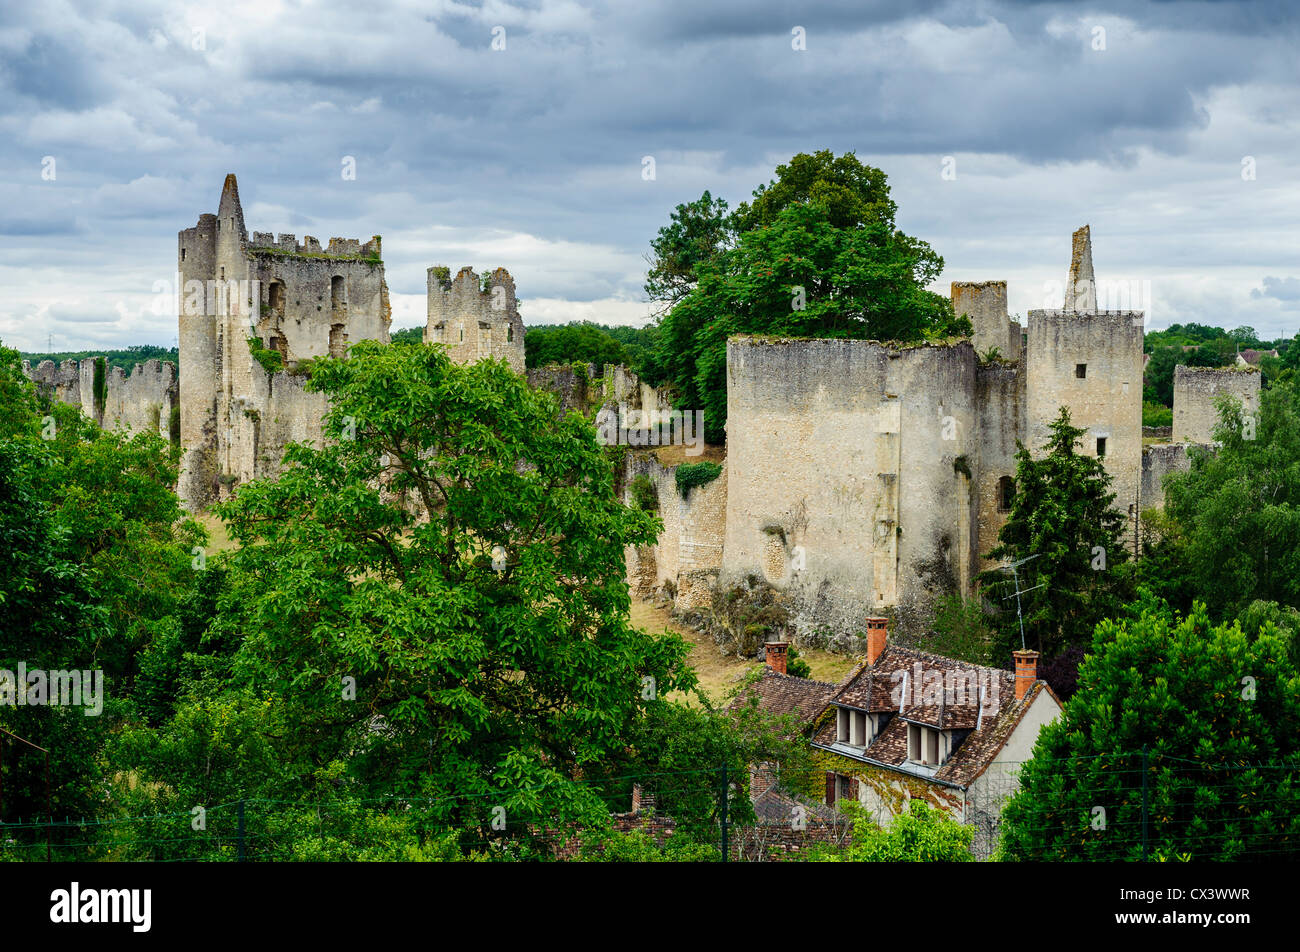 Ruins of an 11th century castle dominate the village of Angles-sur-l'Anglin, Indre, France Stock Photo